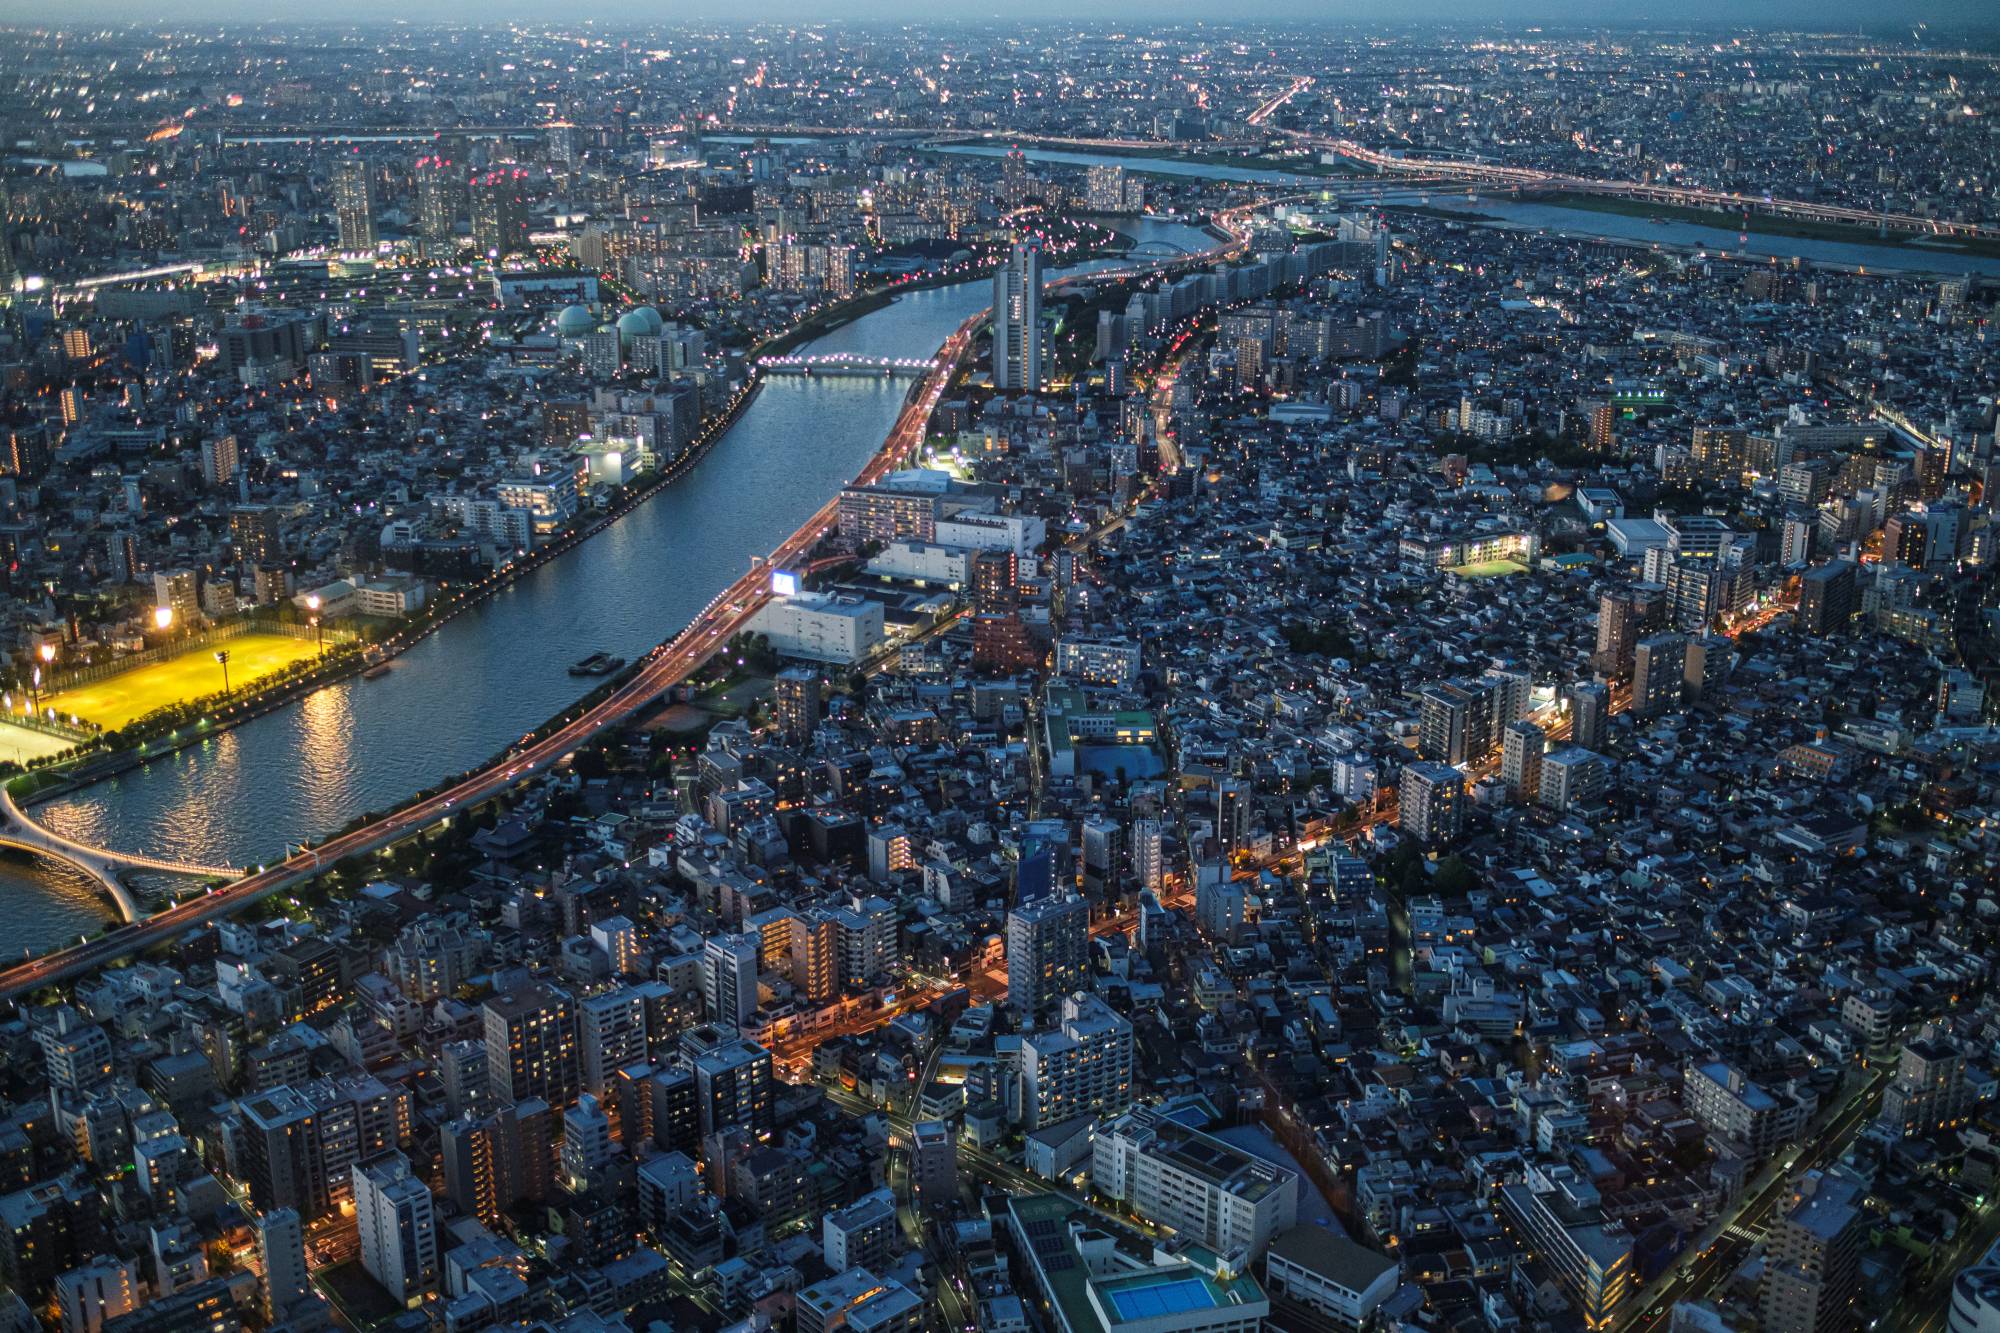 Tokyo Travel Experts on What the City Will Look Like Post-Pandemic